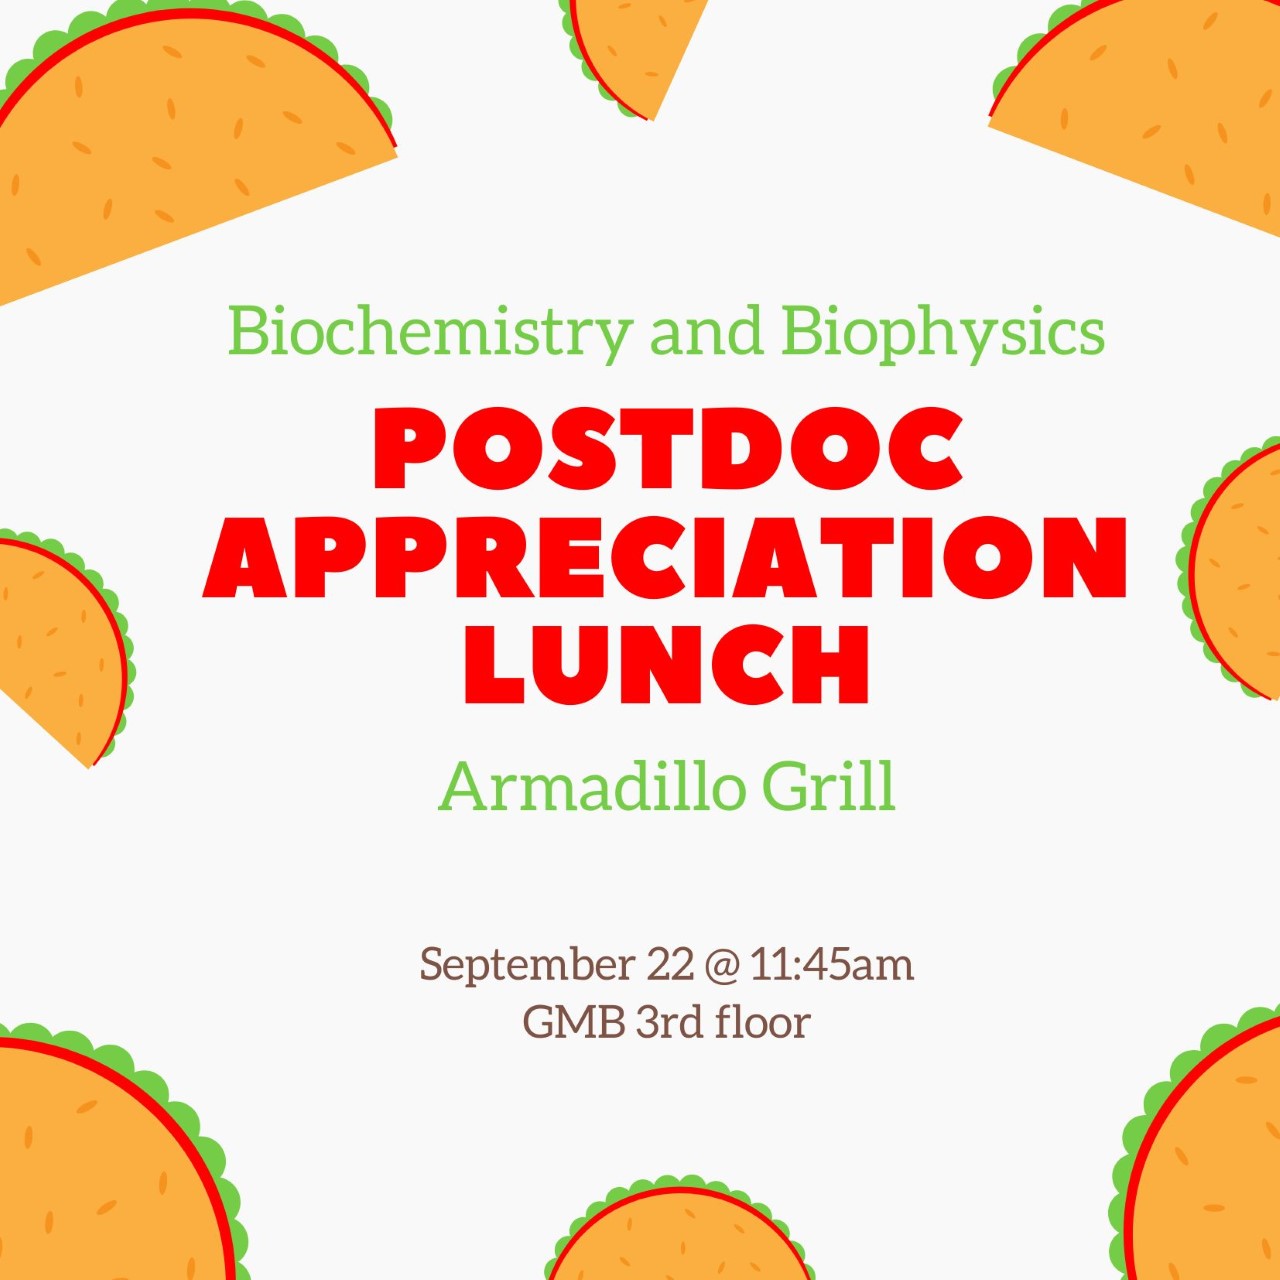 text "Postdoc lunch sept 22 at 11:45am catered by Armadillo Grill"